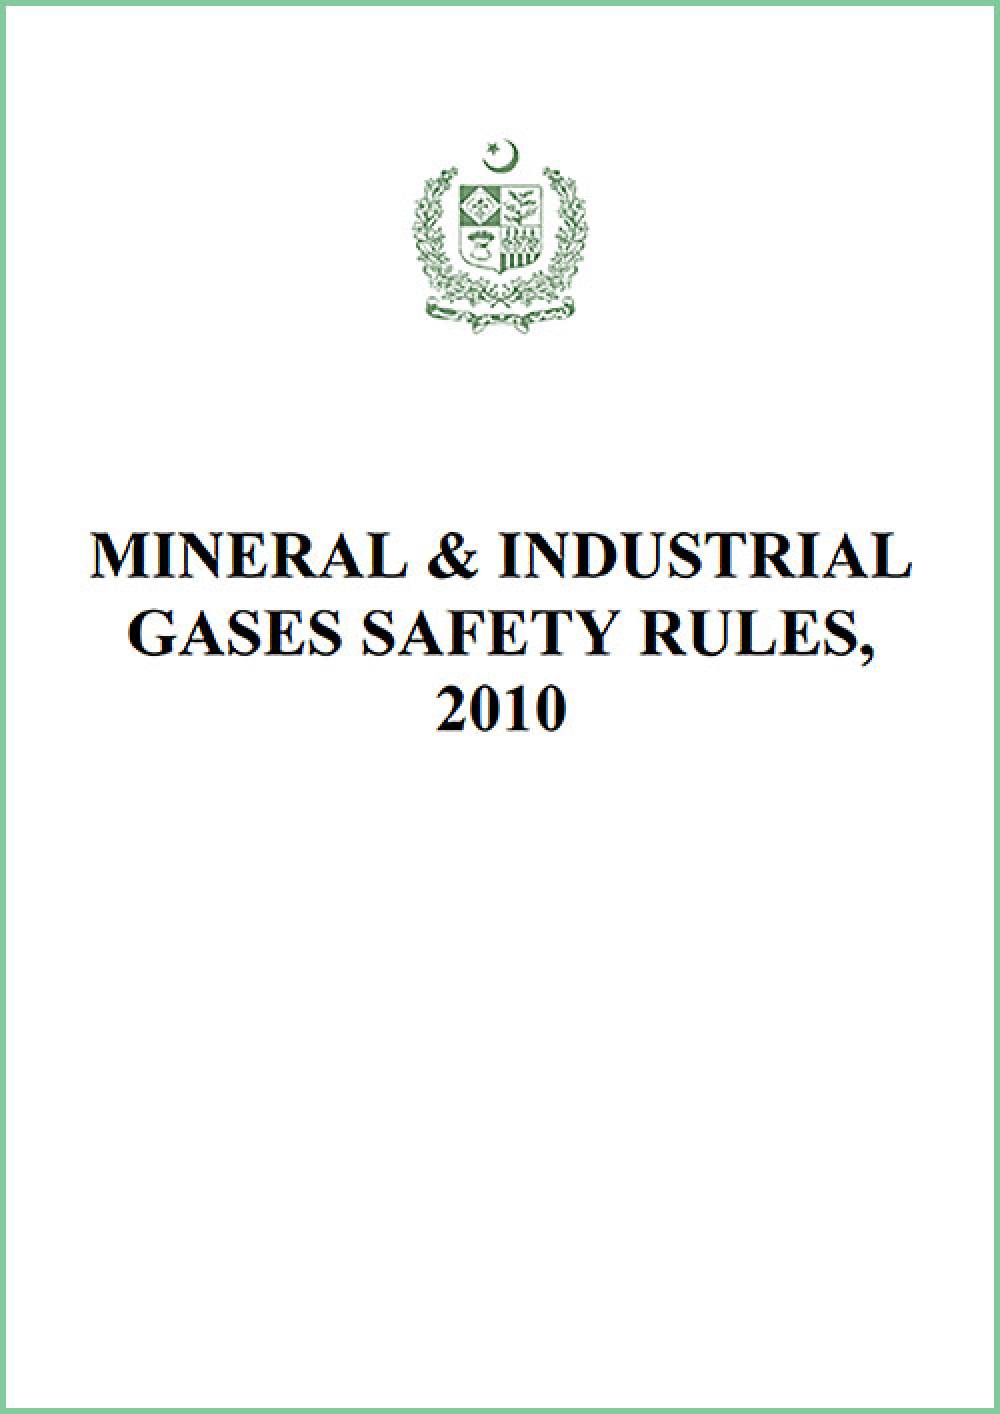 The Mineral & Industrial Gases Safety Rules